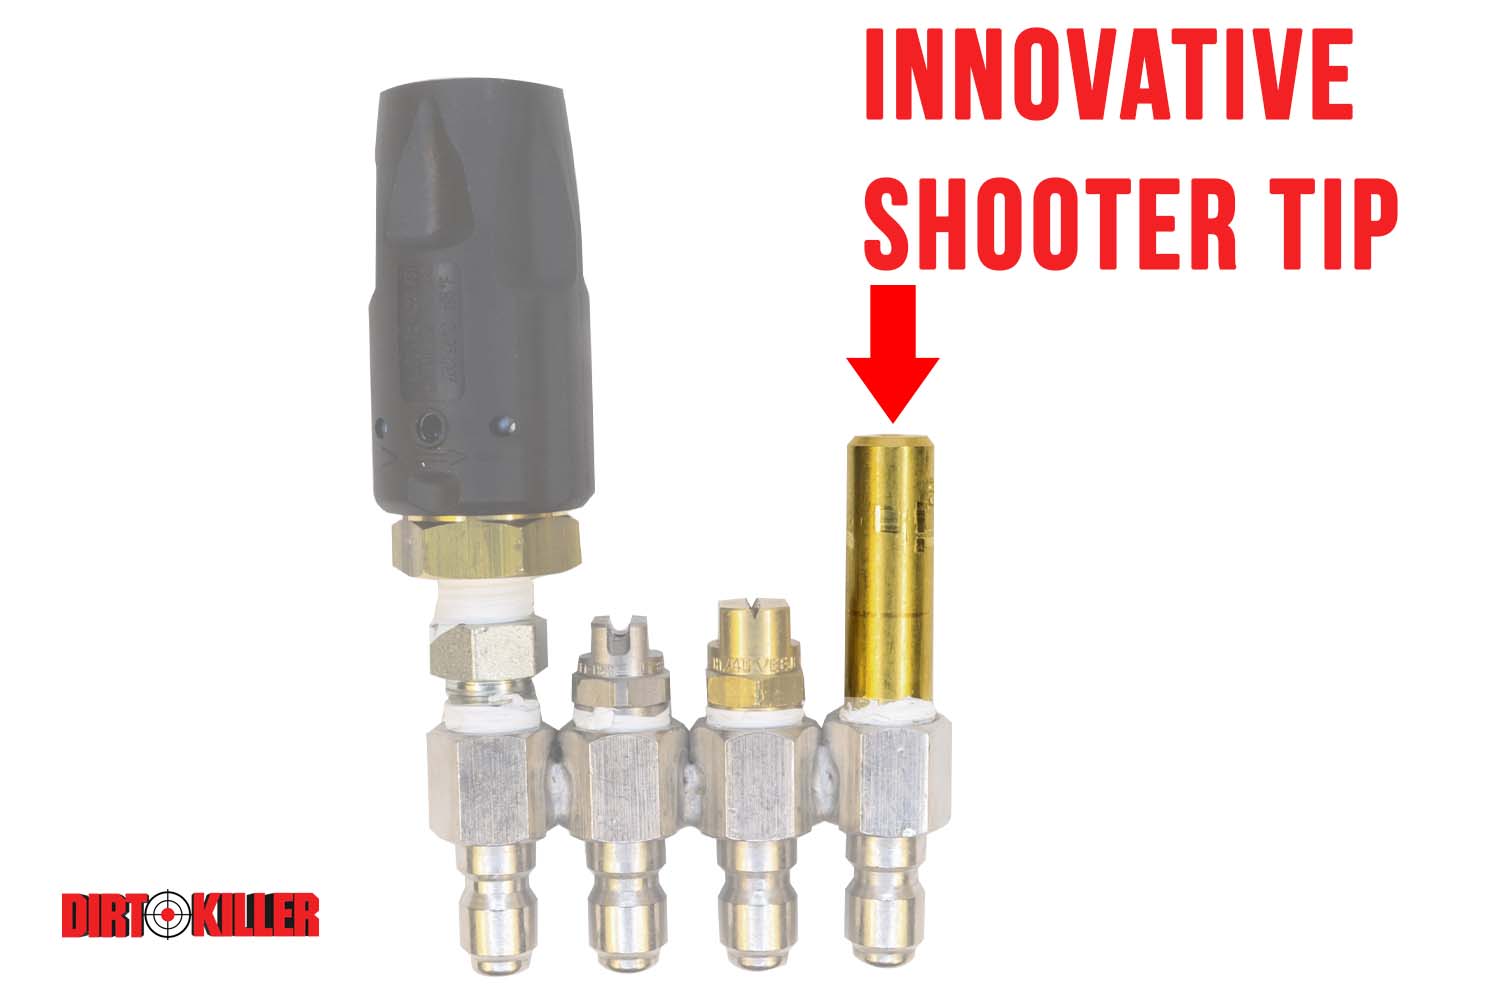 Innovative Shooter Tip 6 gpm Soap Nozzle